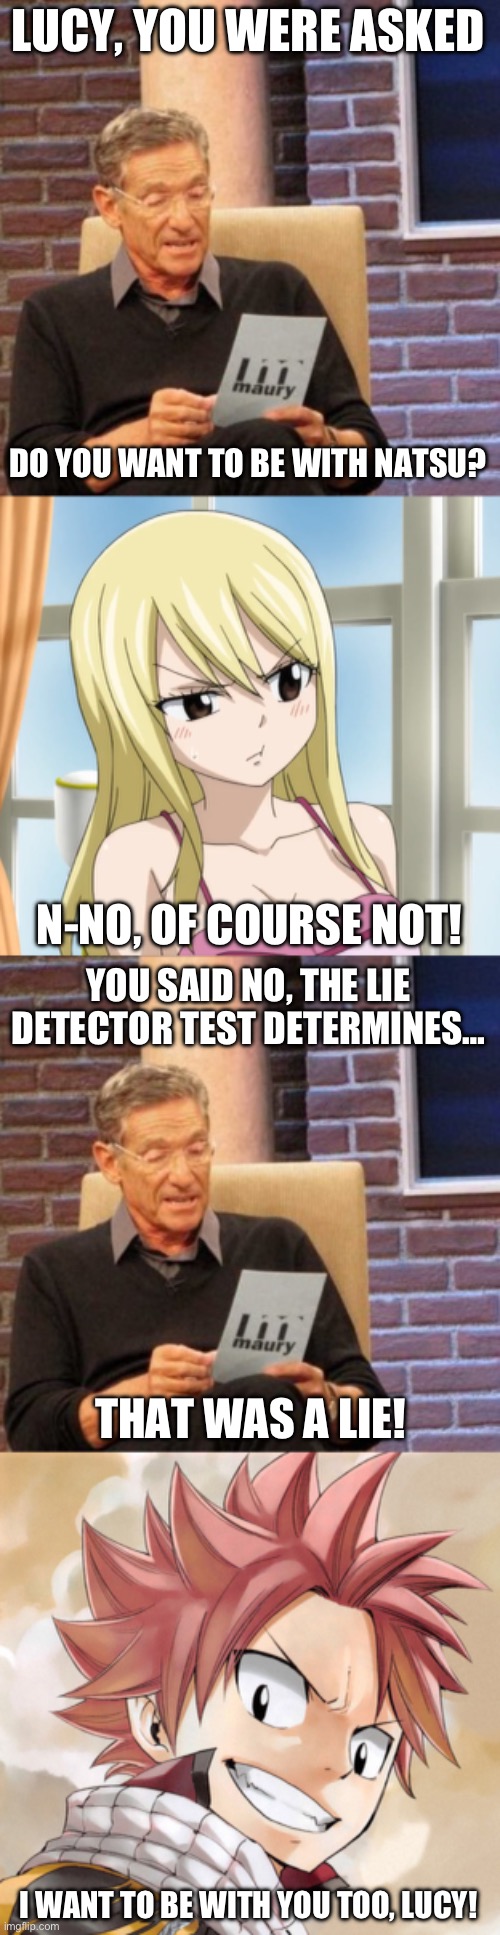 Maury Lie Detector Part 2, Does Lucy Want to be with Natsu? | LUCY, YOU WERE ASKED; DO YOU WANT TO BE WITH NATSU? N-NO, OF COURSE NOT! YOU SAID NO, THE LIE DETECTOR TEST DETERMINES…; THAT WAS A LIE! I WANT TO BE WITH YOU TOO, LUCY! | image tagged in memes,maury lie detector,fairy tail,natsu dragneel,lucy heartfilia,nalu | made w/ Imgflip meme maker